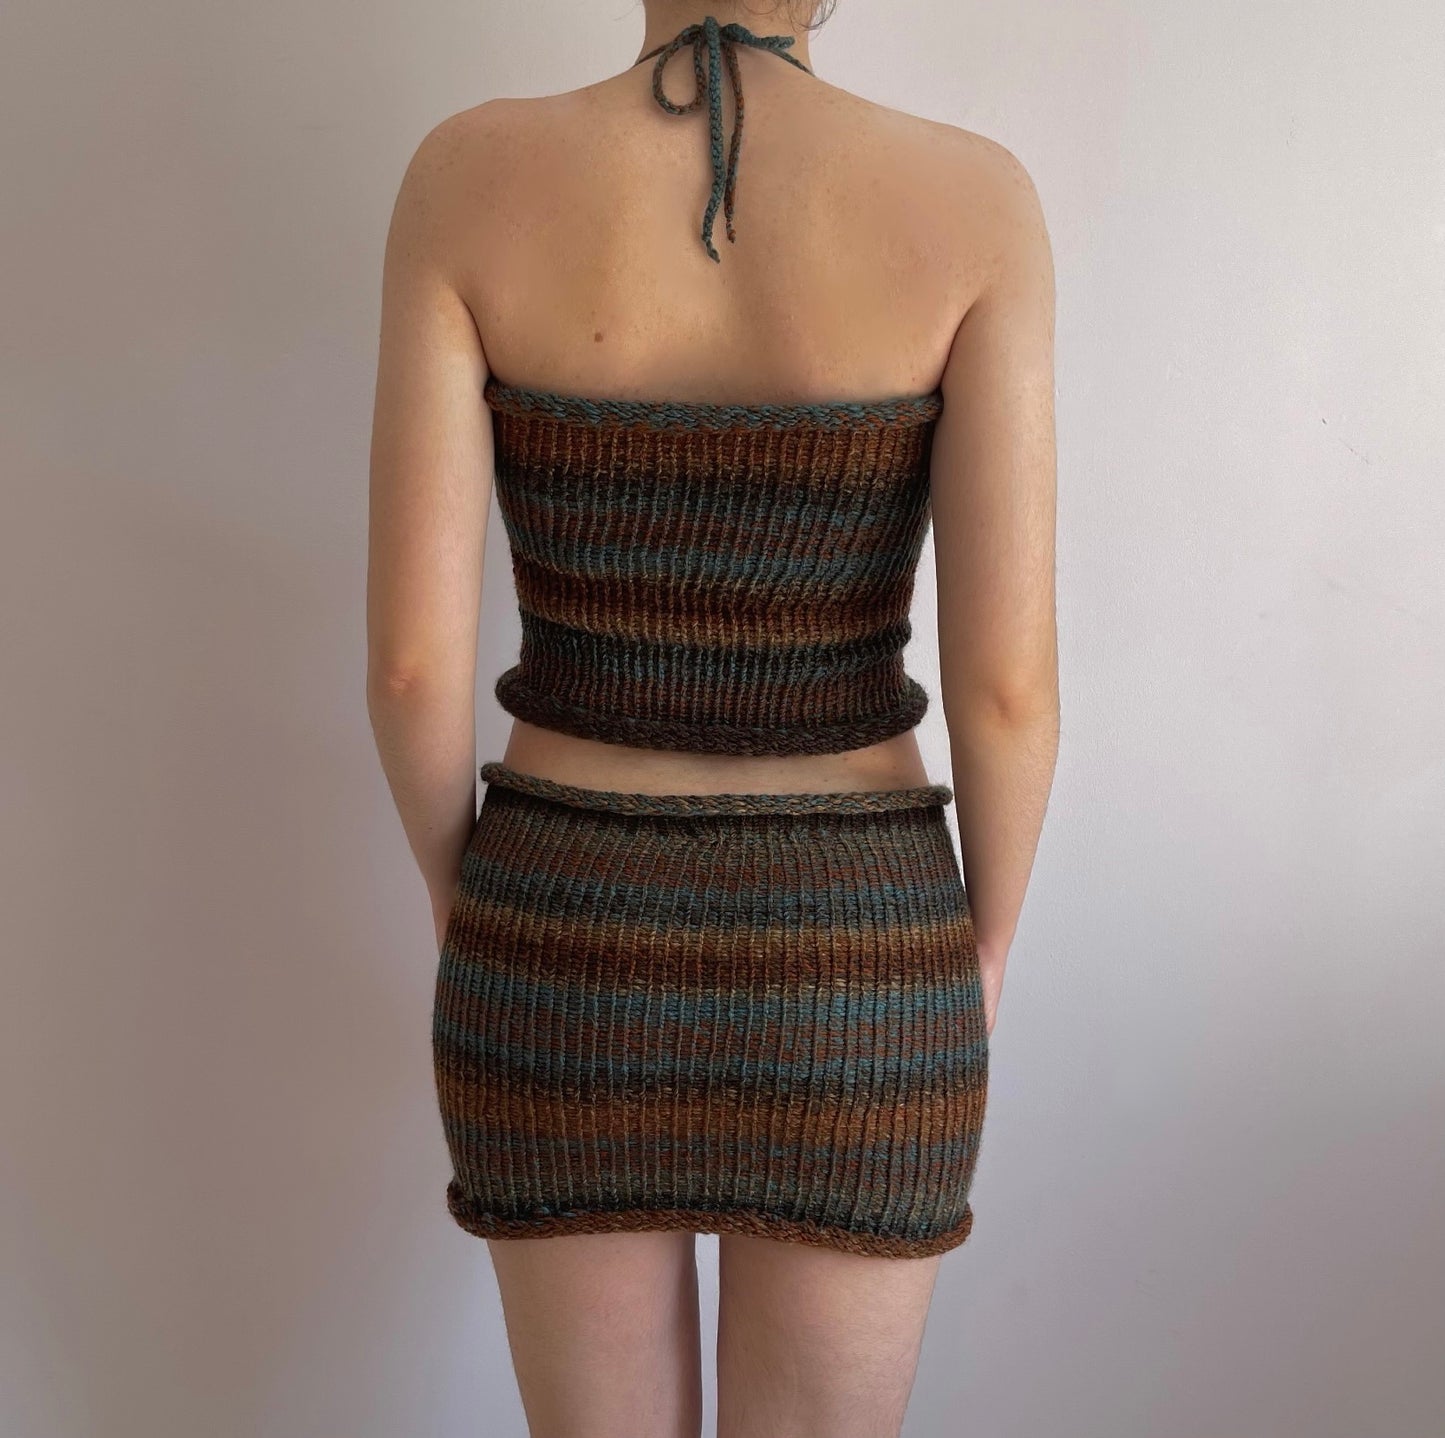 Handmade knitted mini skirt in brown and blue